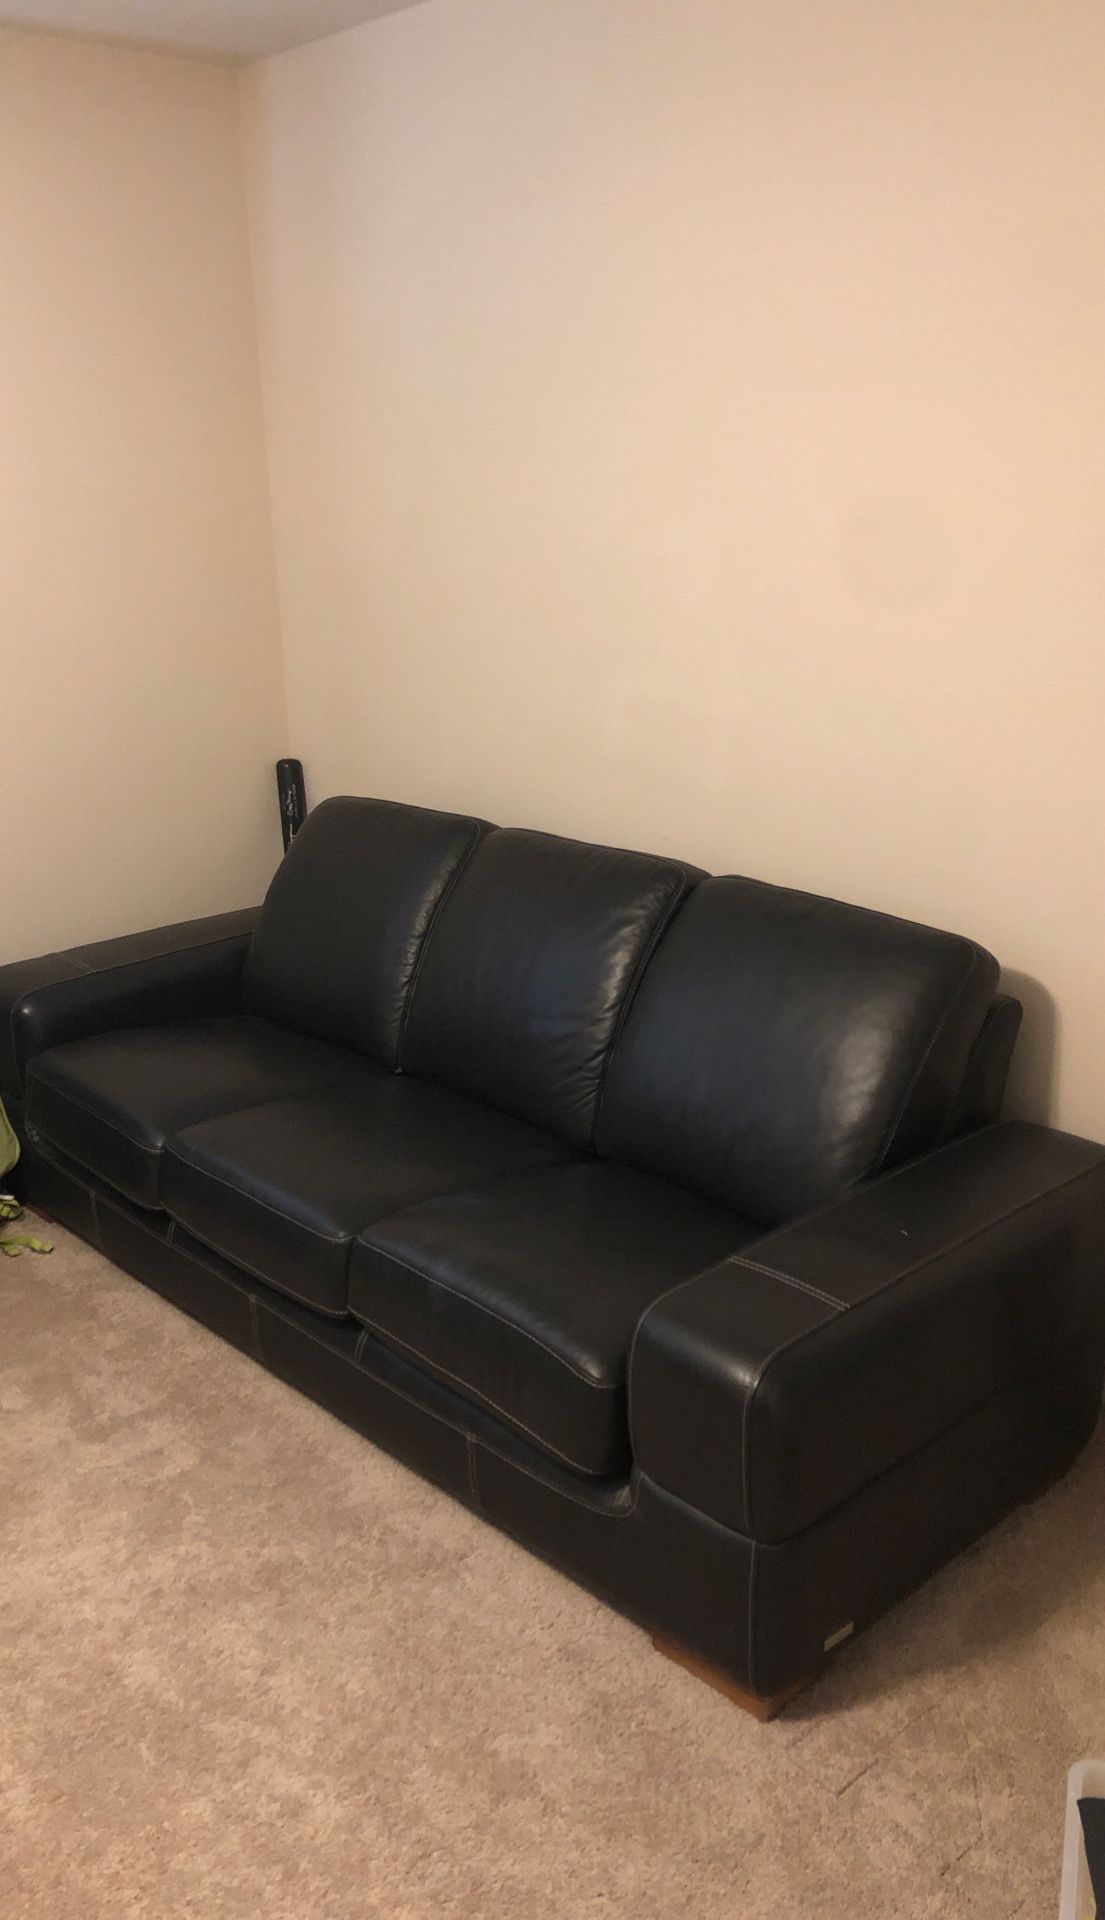 Awesome black leather couch with white cross stitch